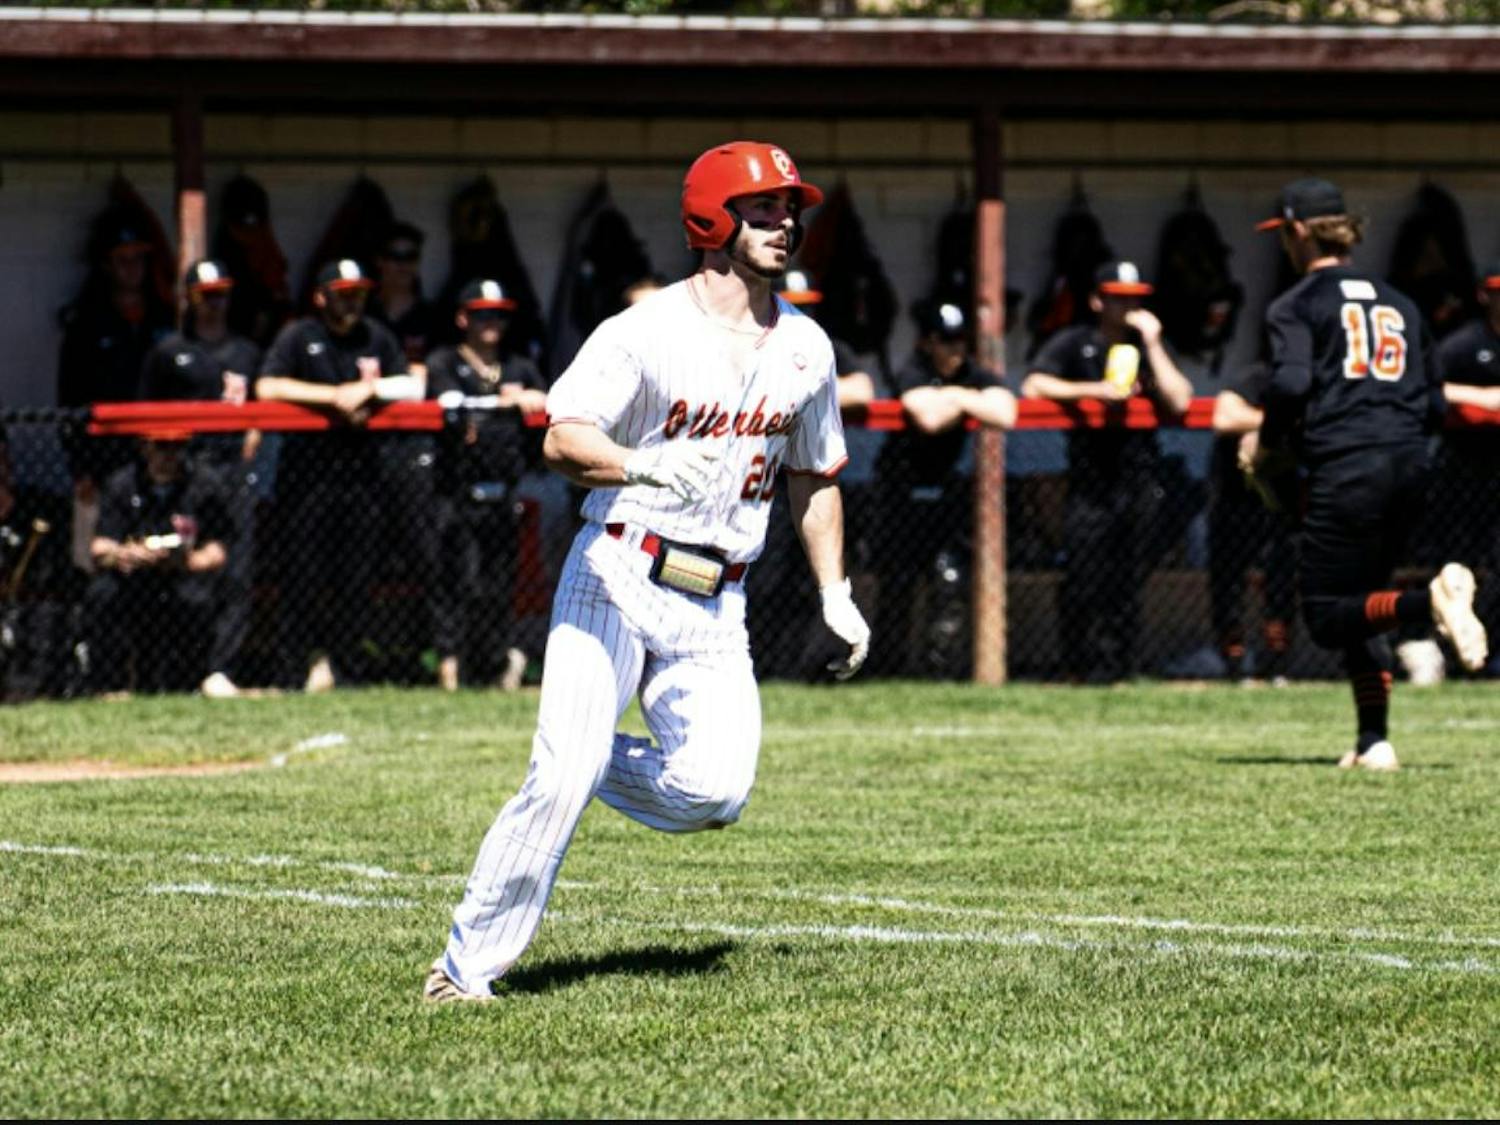 Wolf runs to first base after hit against Heidelberg.jpg